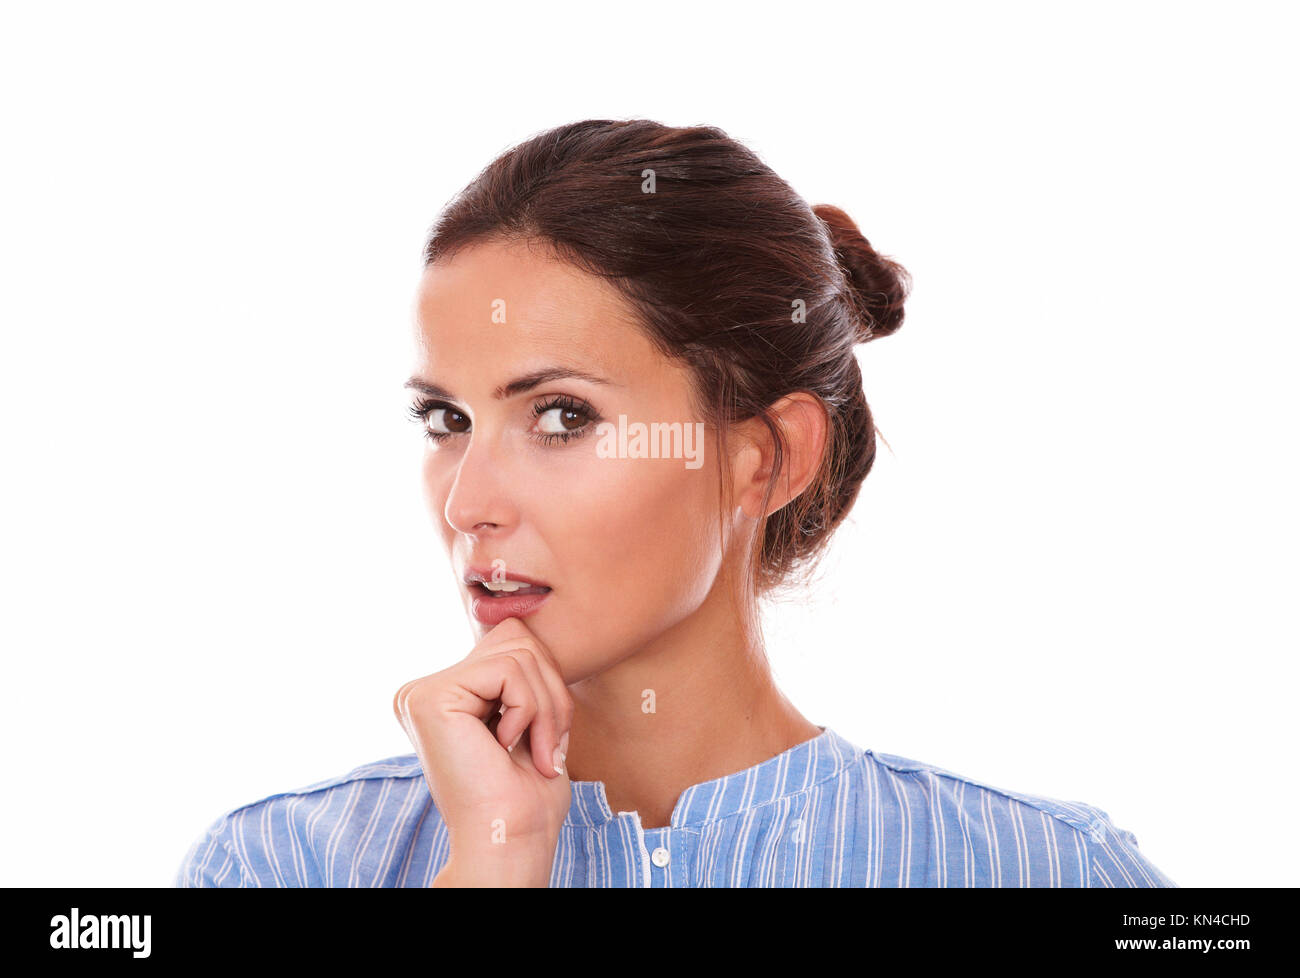 Closeup portrait of 30-34 years brunette on blue shirt wondering and looking at you on isolated white background. Stock Photo